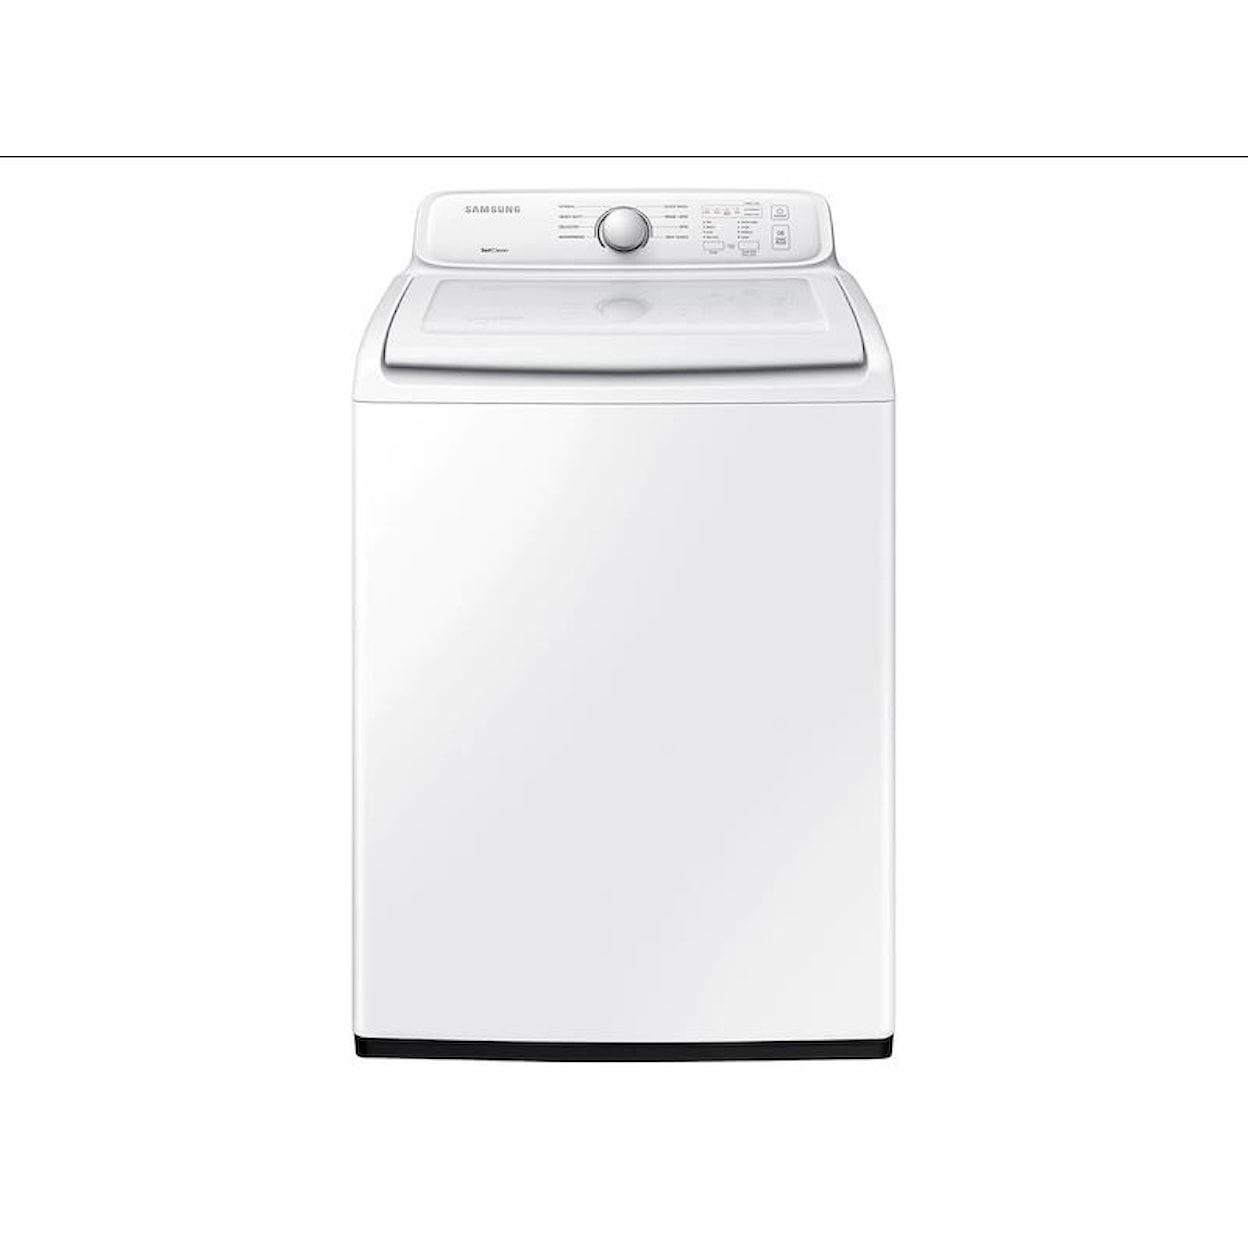 Samsung Appliances Top Load Washers - Samsung 4.0 cu. ft. Top Load Washer with Self Clean